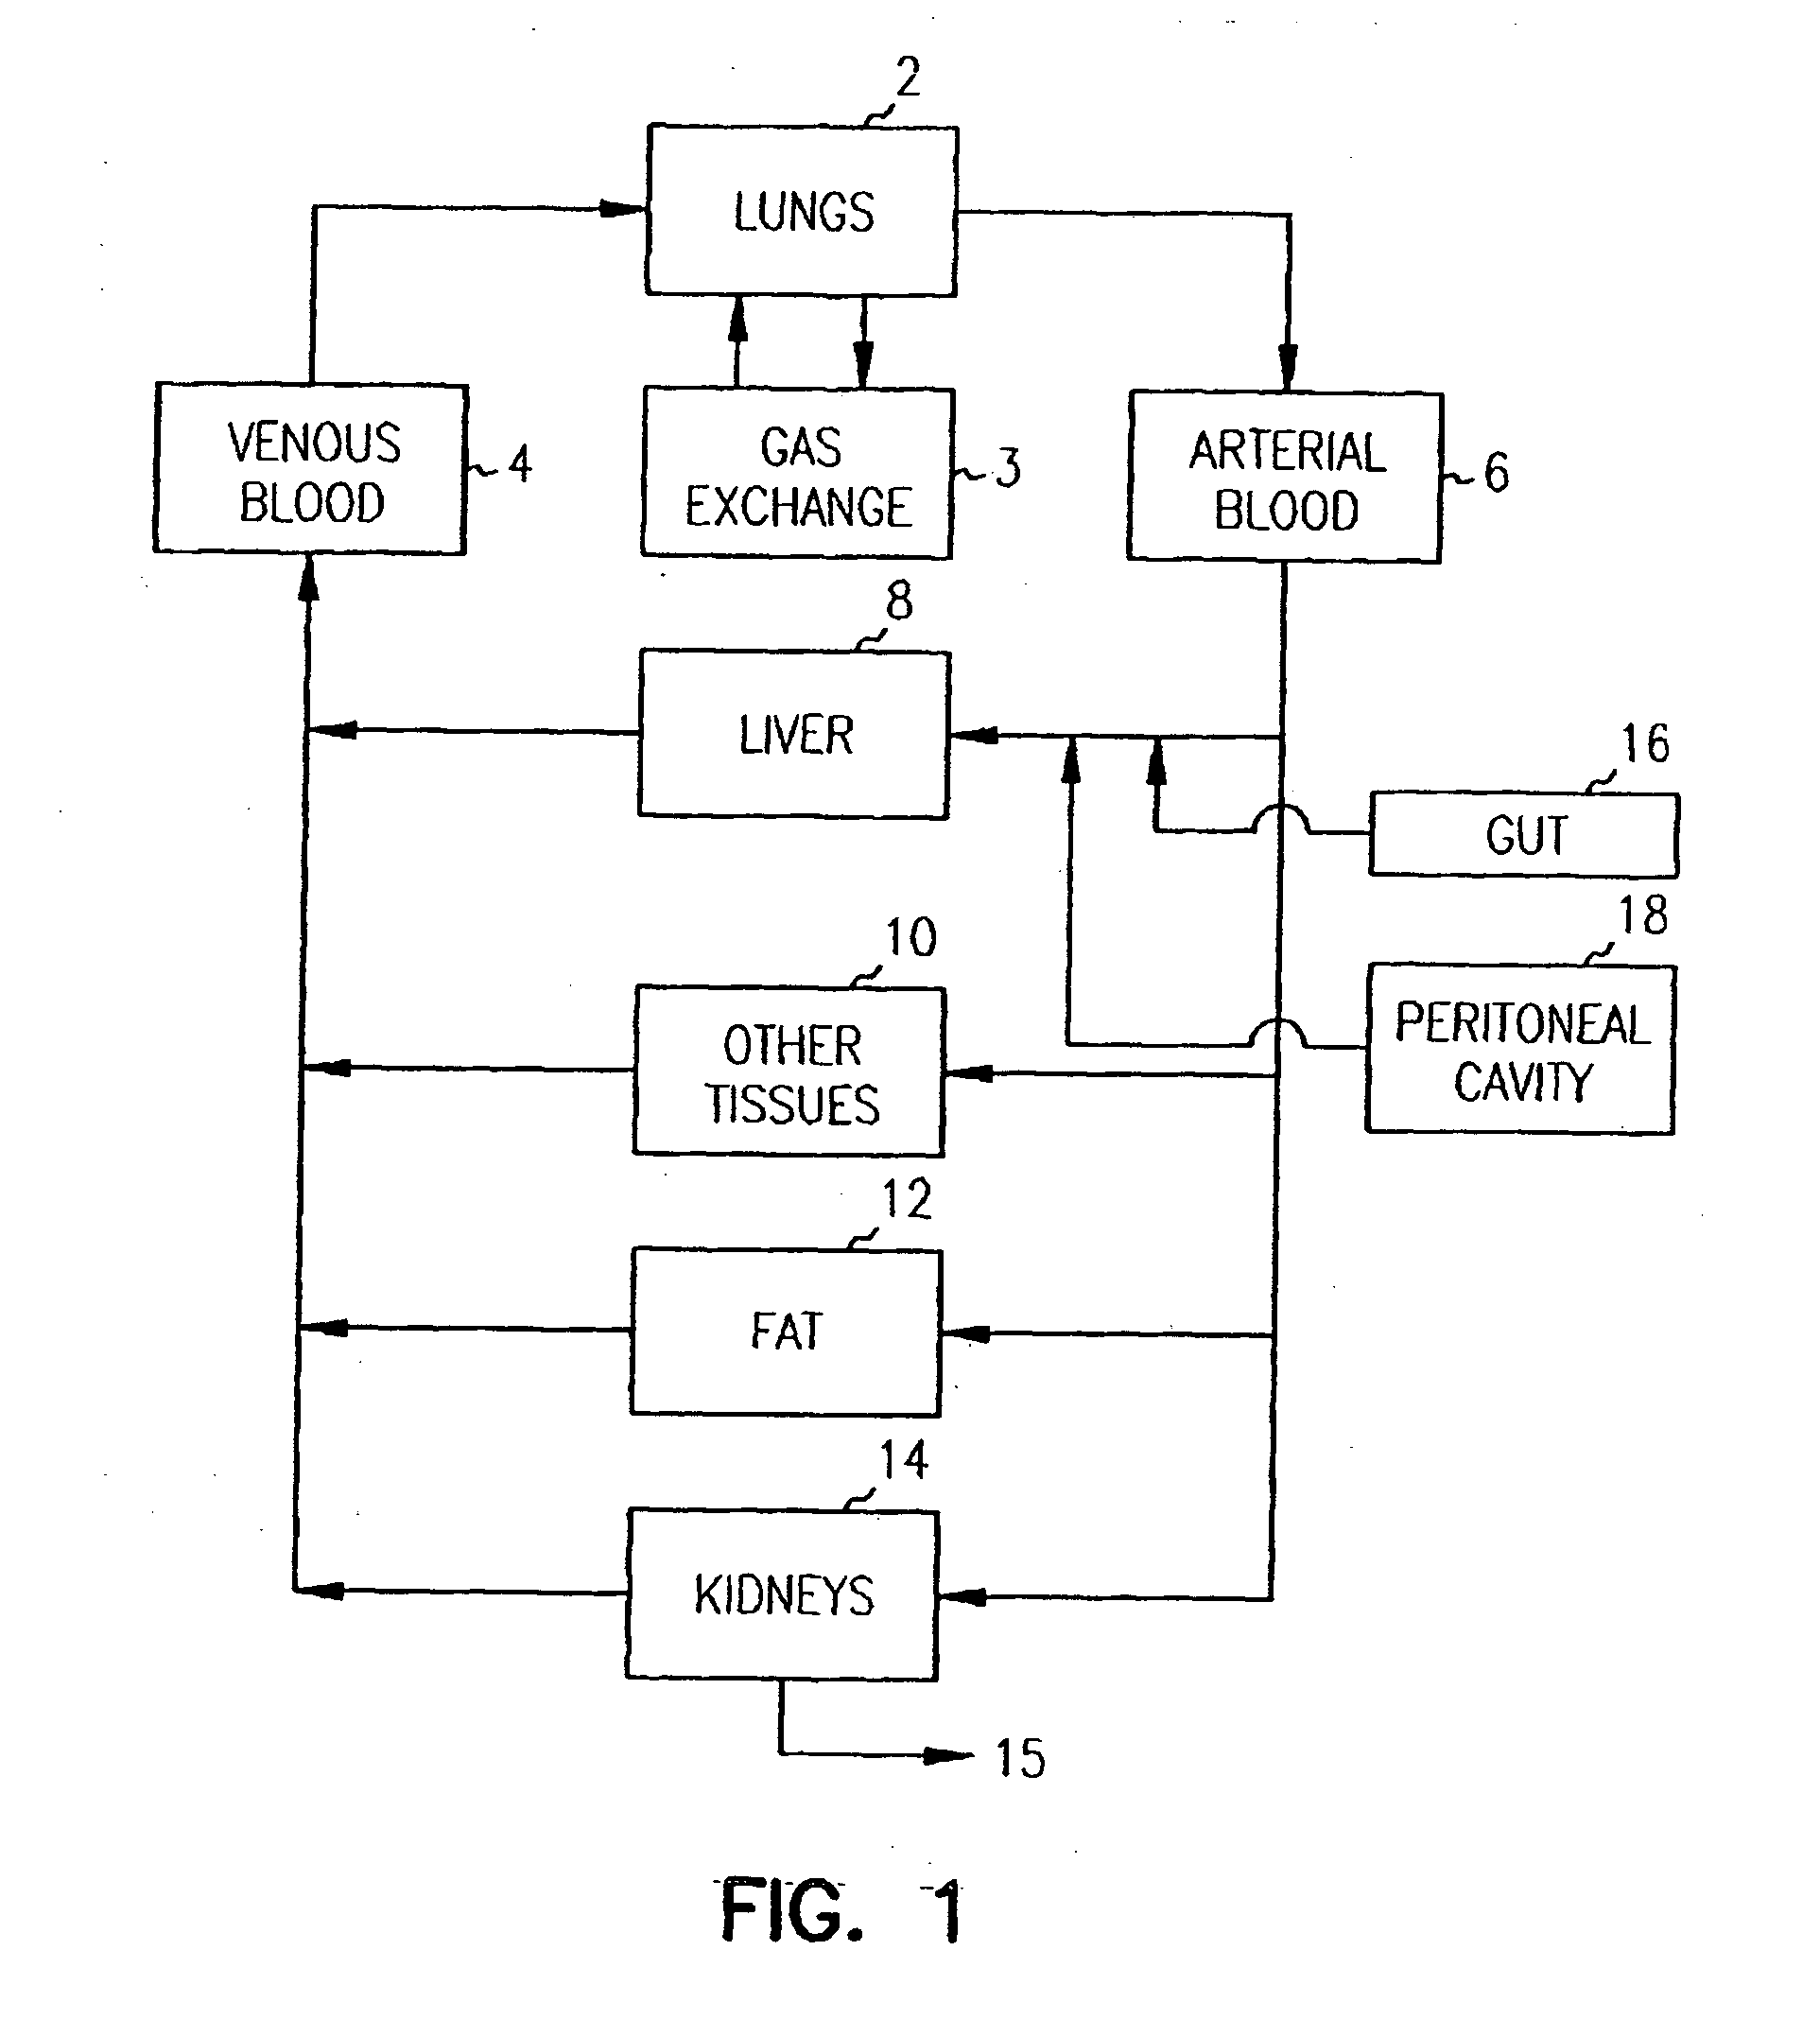 Pharmacokinetic-based culture system with biological barriers